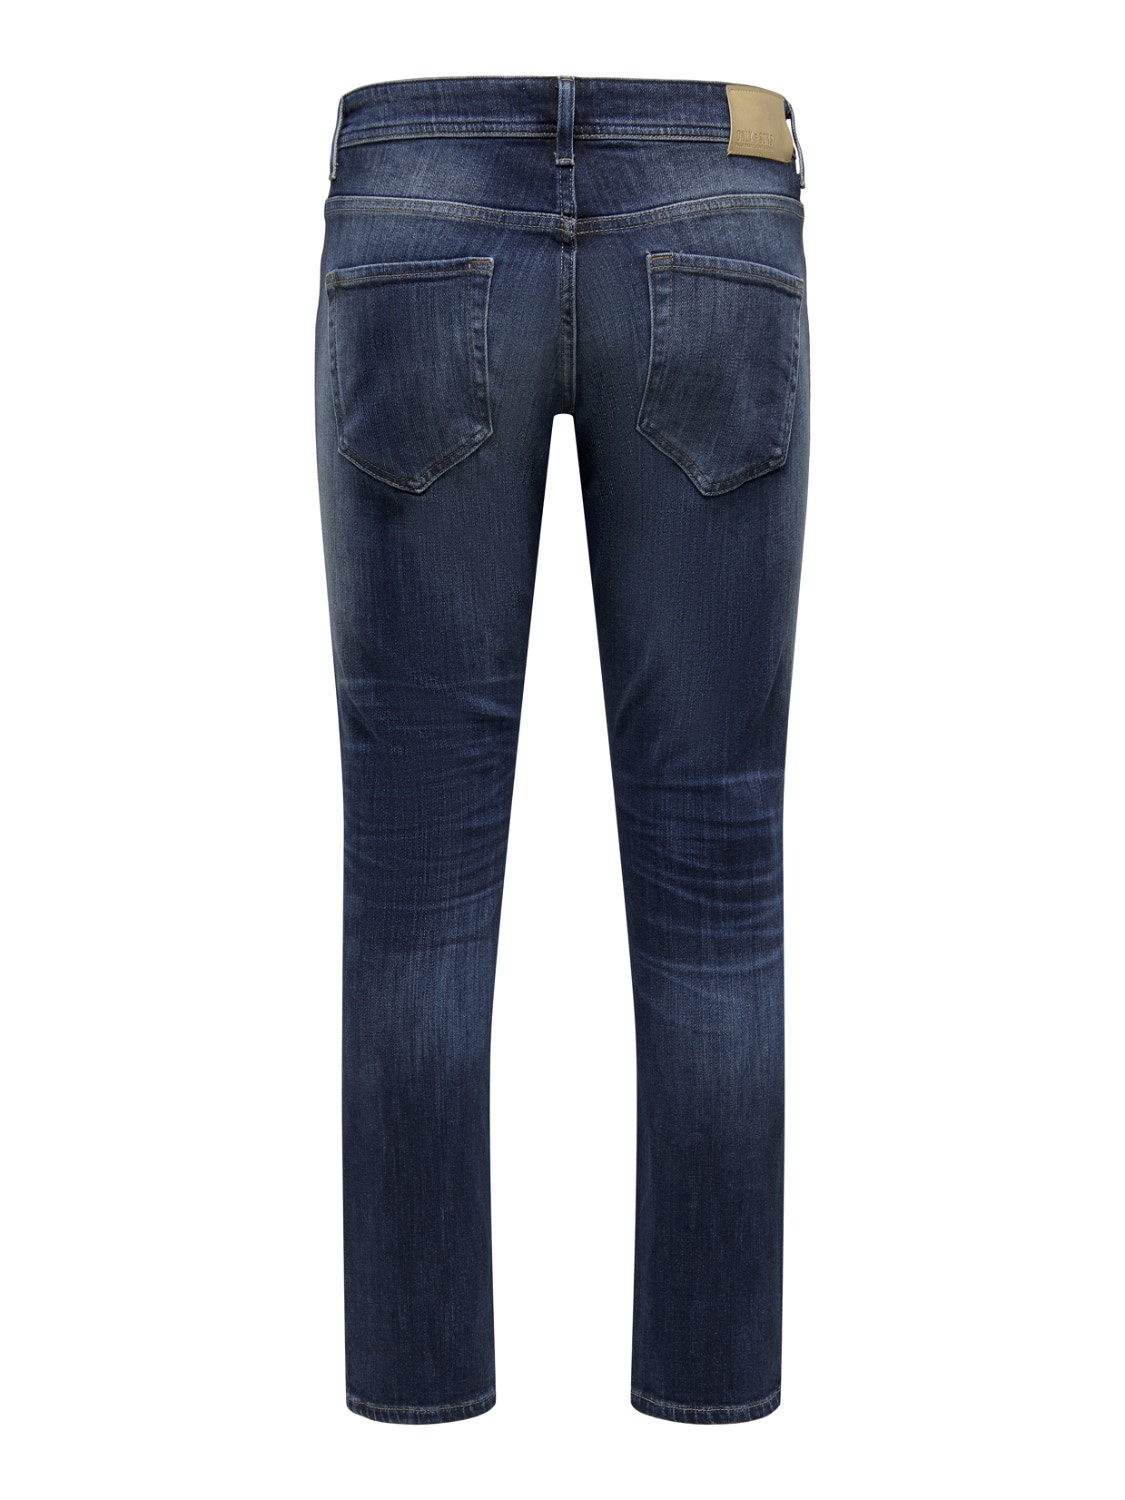 ONLY & SONS Jeans Regular Fit Taille moyenne -Blue Denim - 22023251